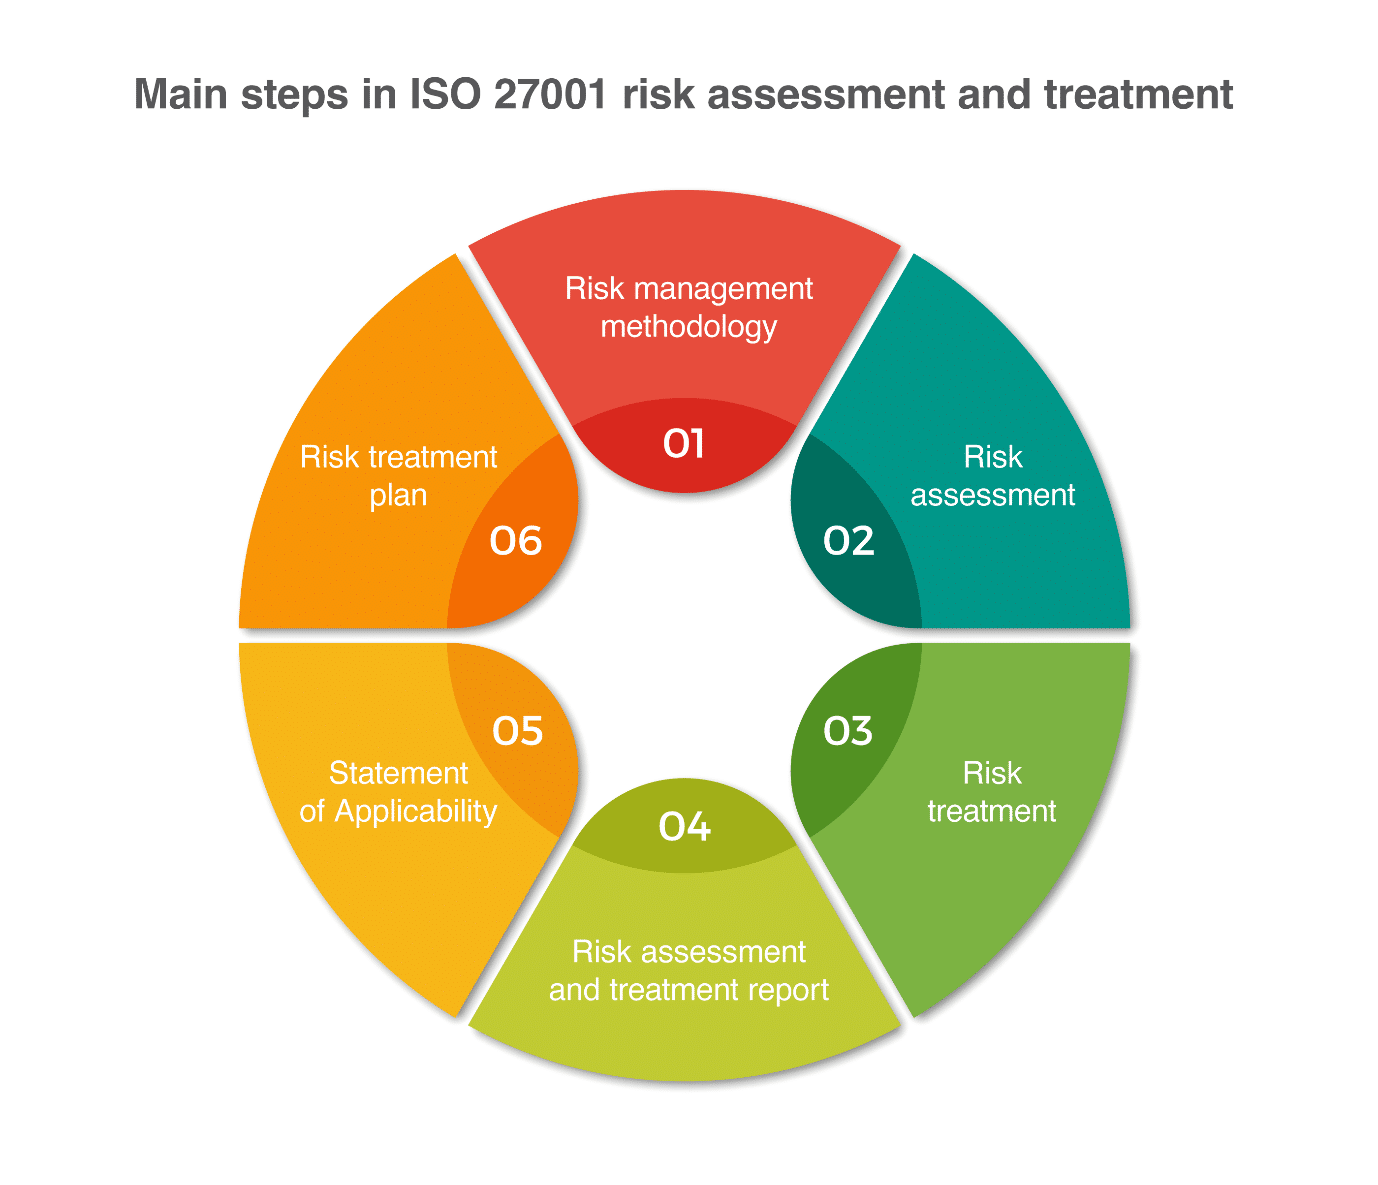 Learn how to carry out risk assessment and treatment according to ISO 27001. Read the complete guide to ISO 27001 risk management now.